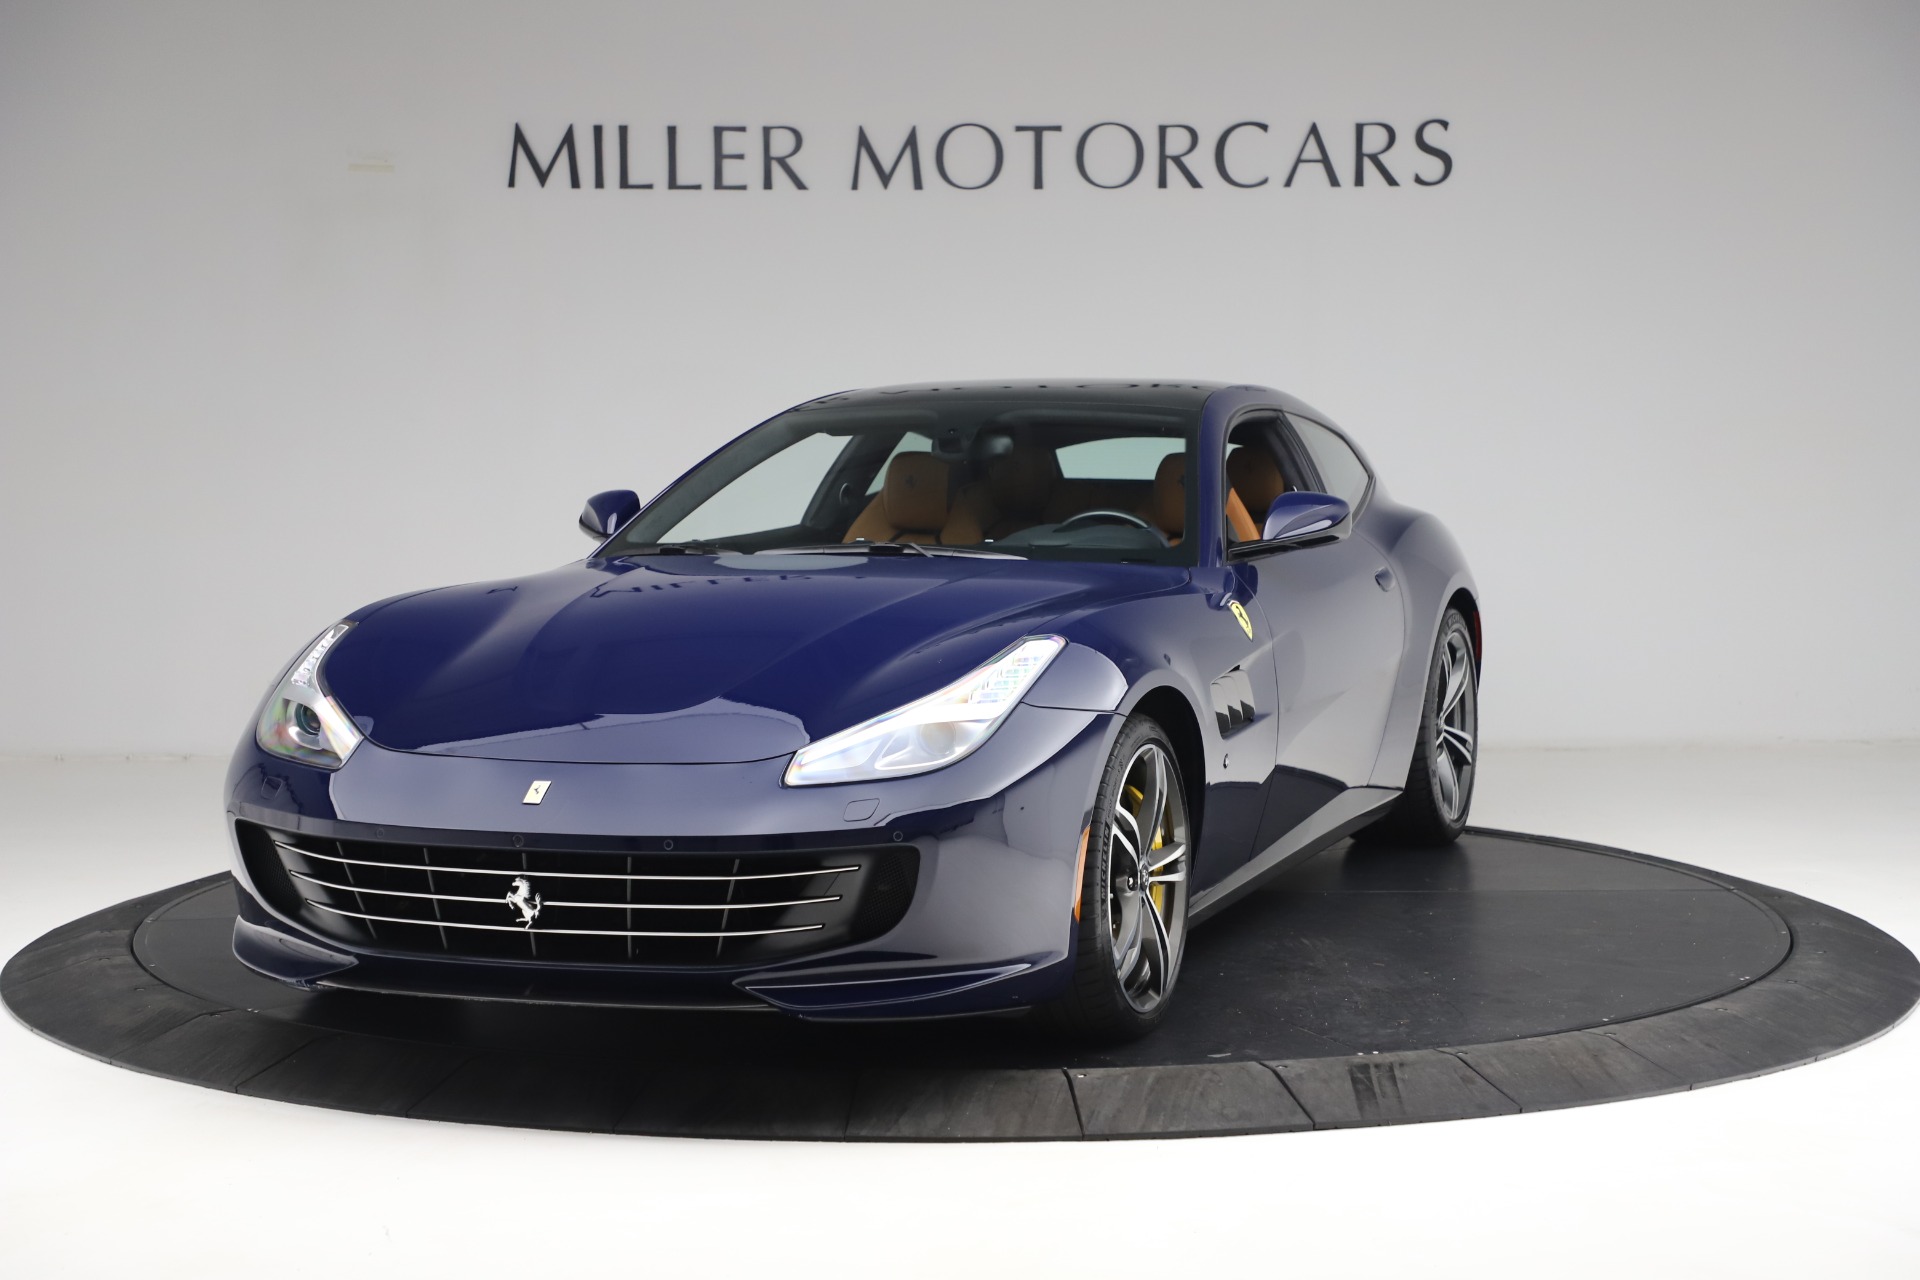 Used 2018 Ferrari GTC4Lusso for sale Sold at Maserati of Greenwich in Greenwich CT 06830 1